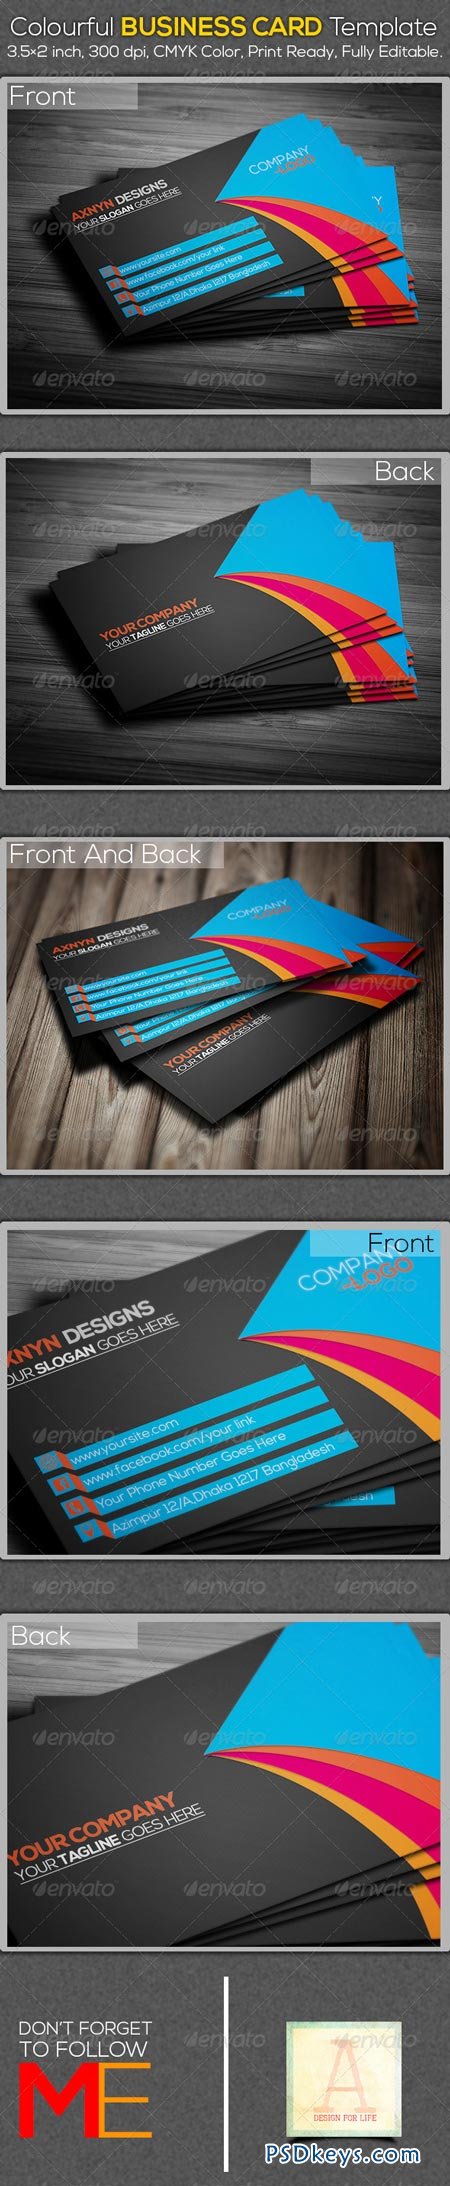 Colourful Business Card Template 6898237